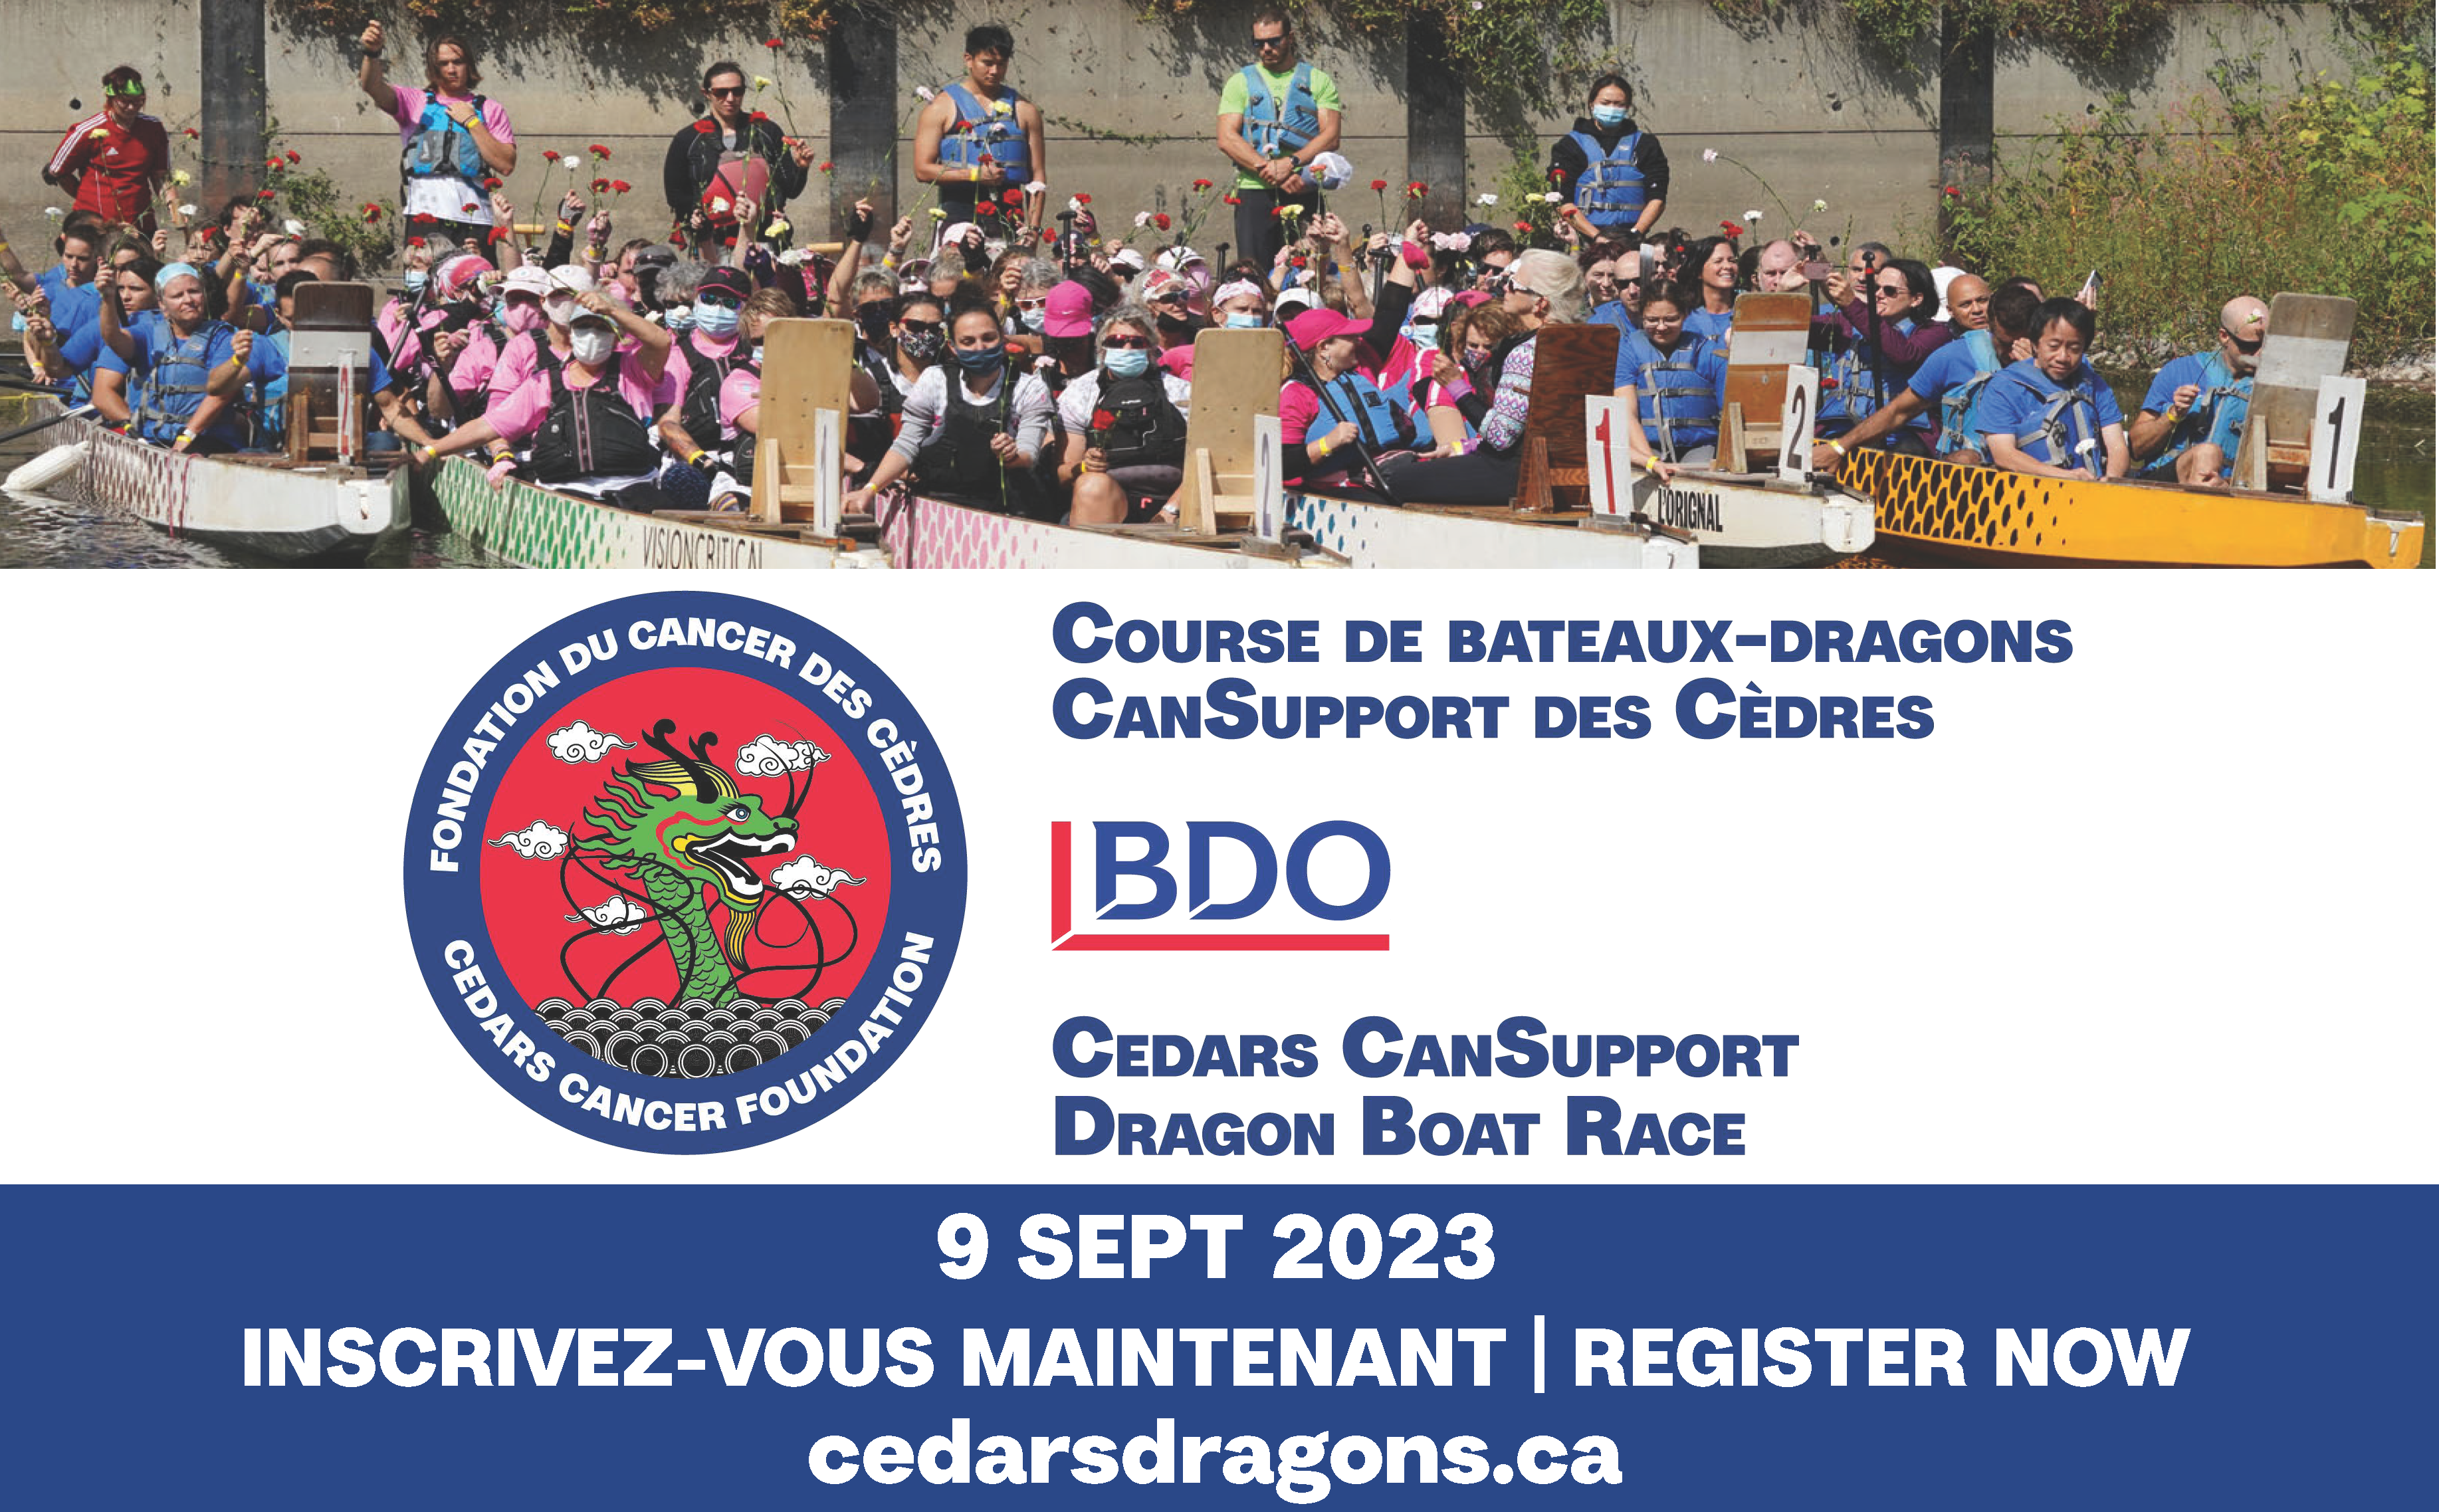 Cedars CanSupport Dragon Boat Race